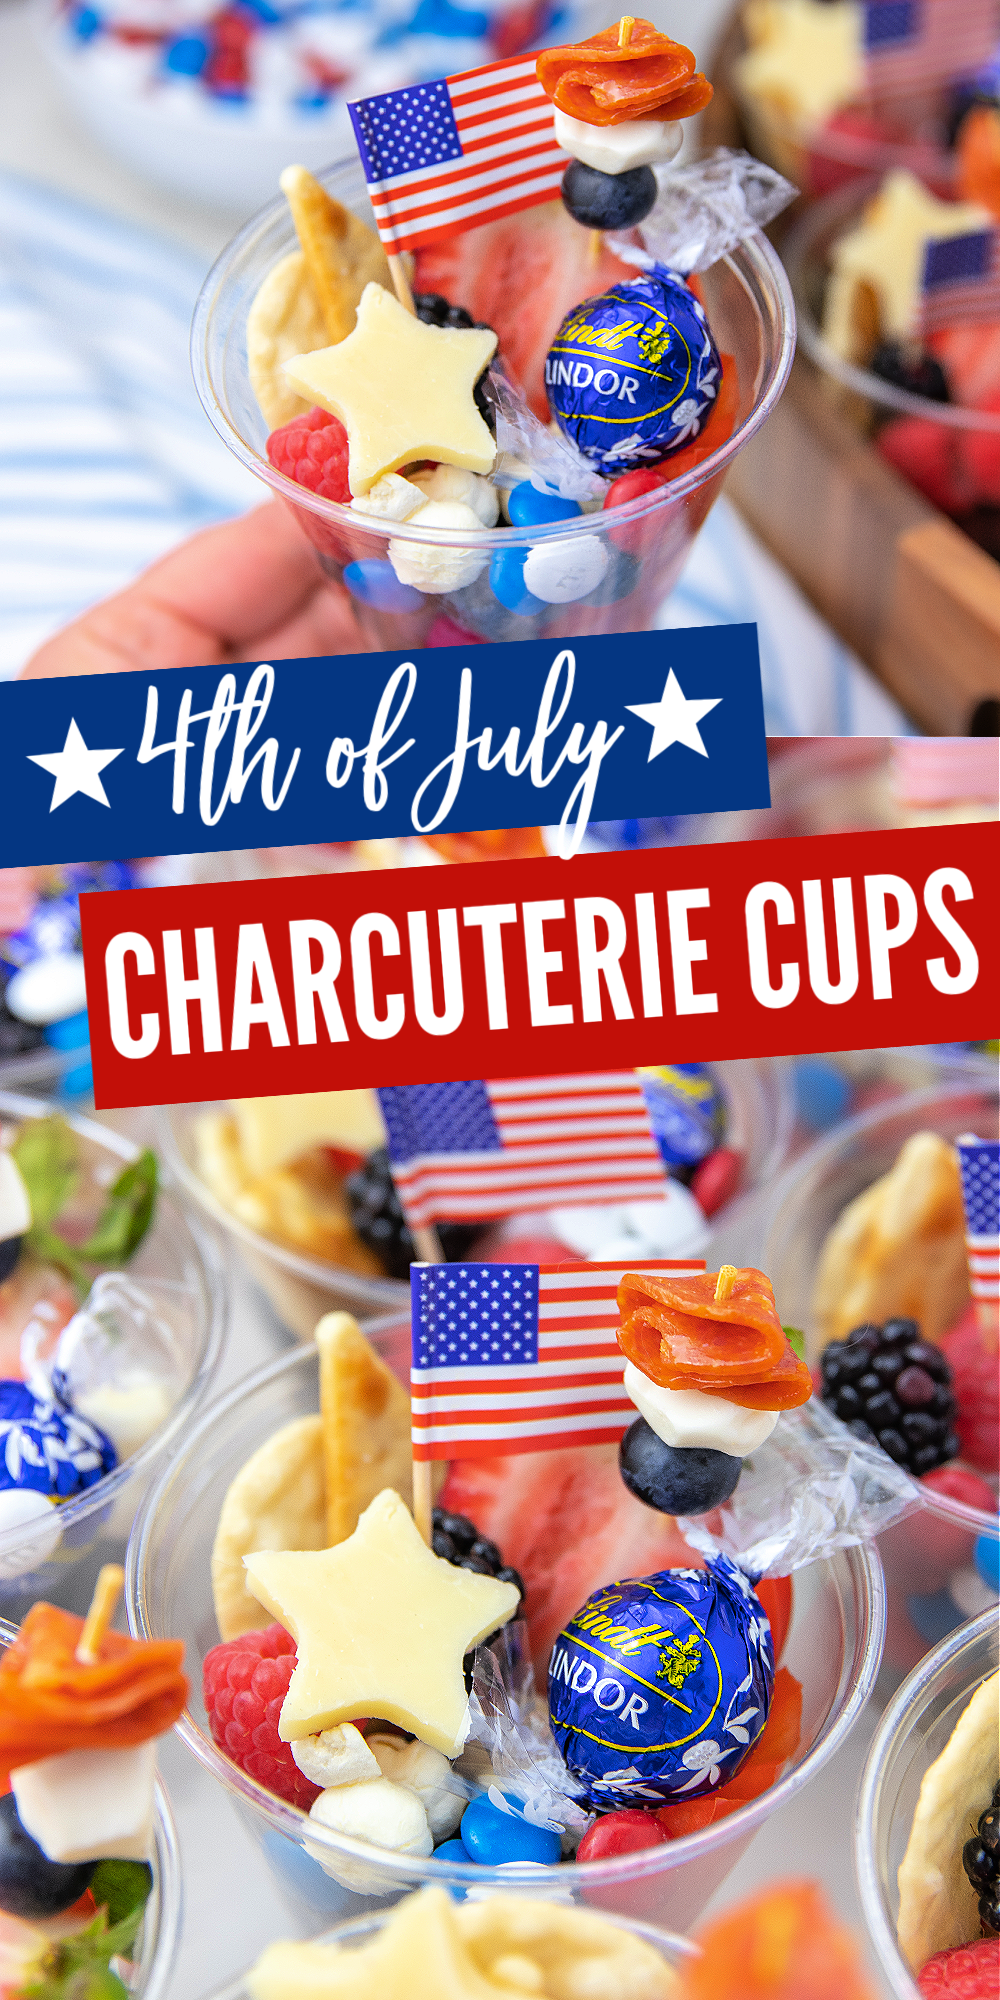 4th of july charcuterie cups pinterest image with a blue and red background and white writing